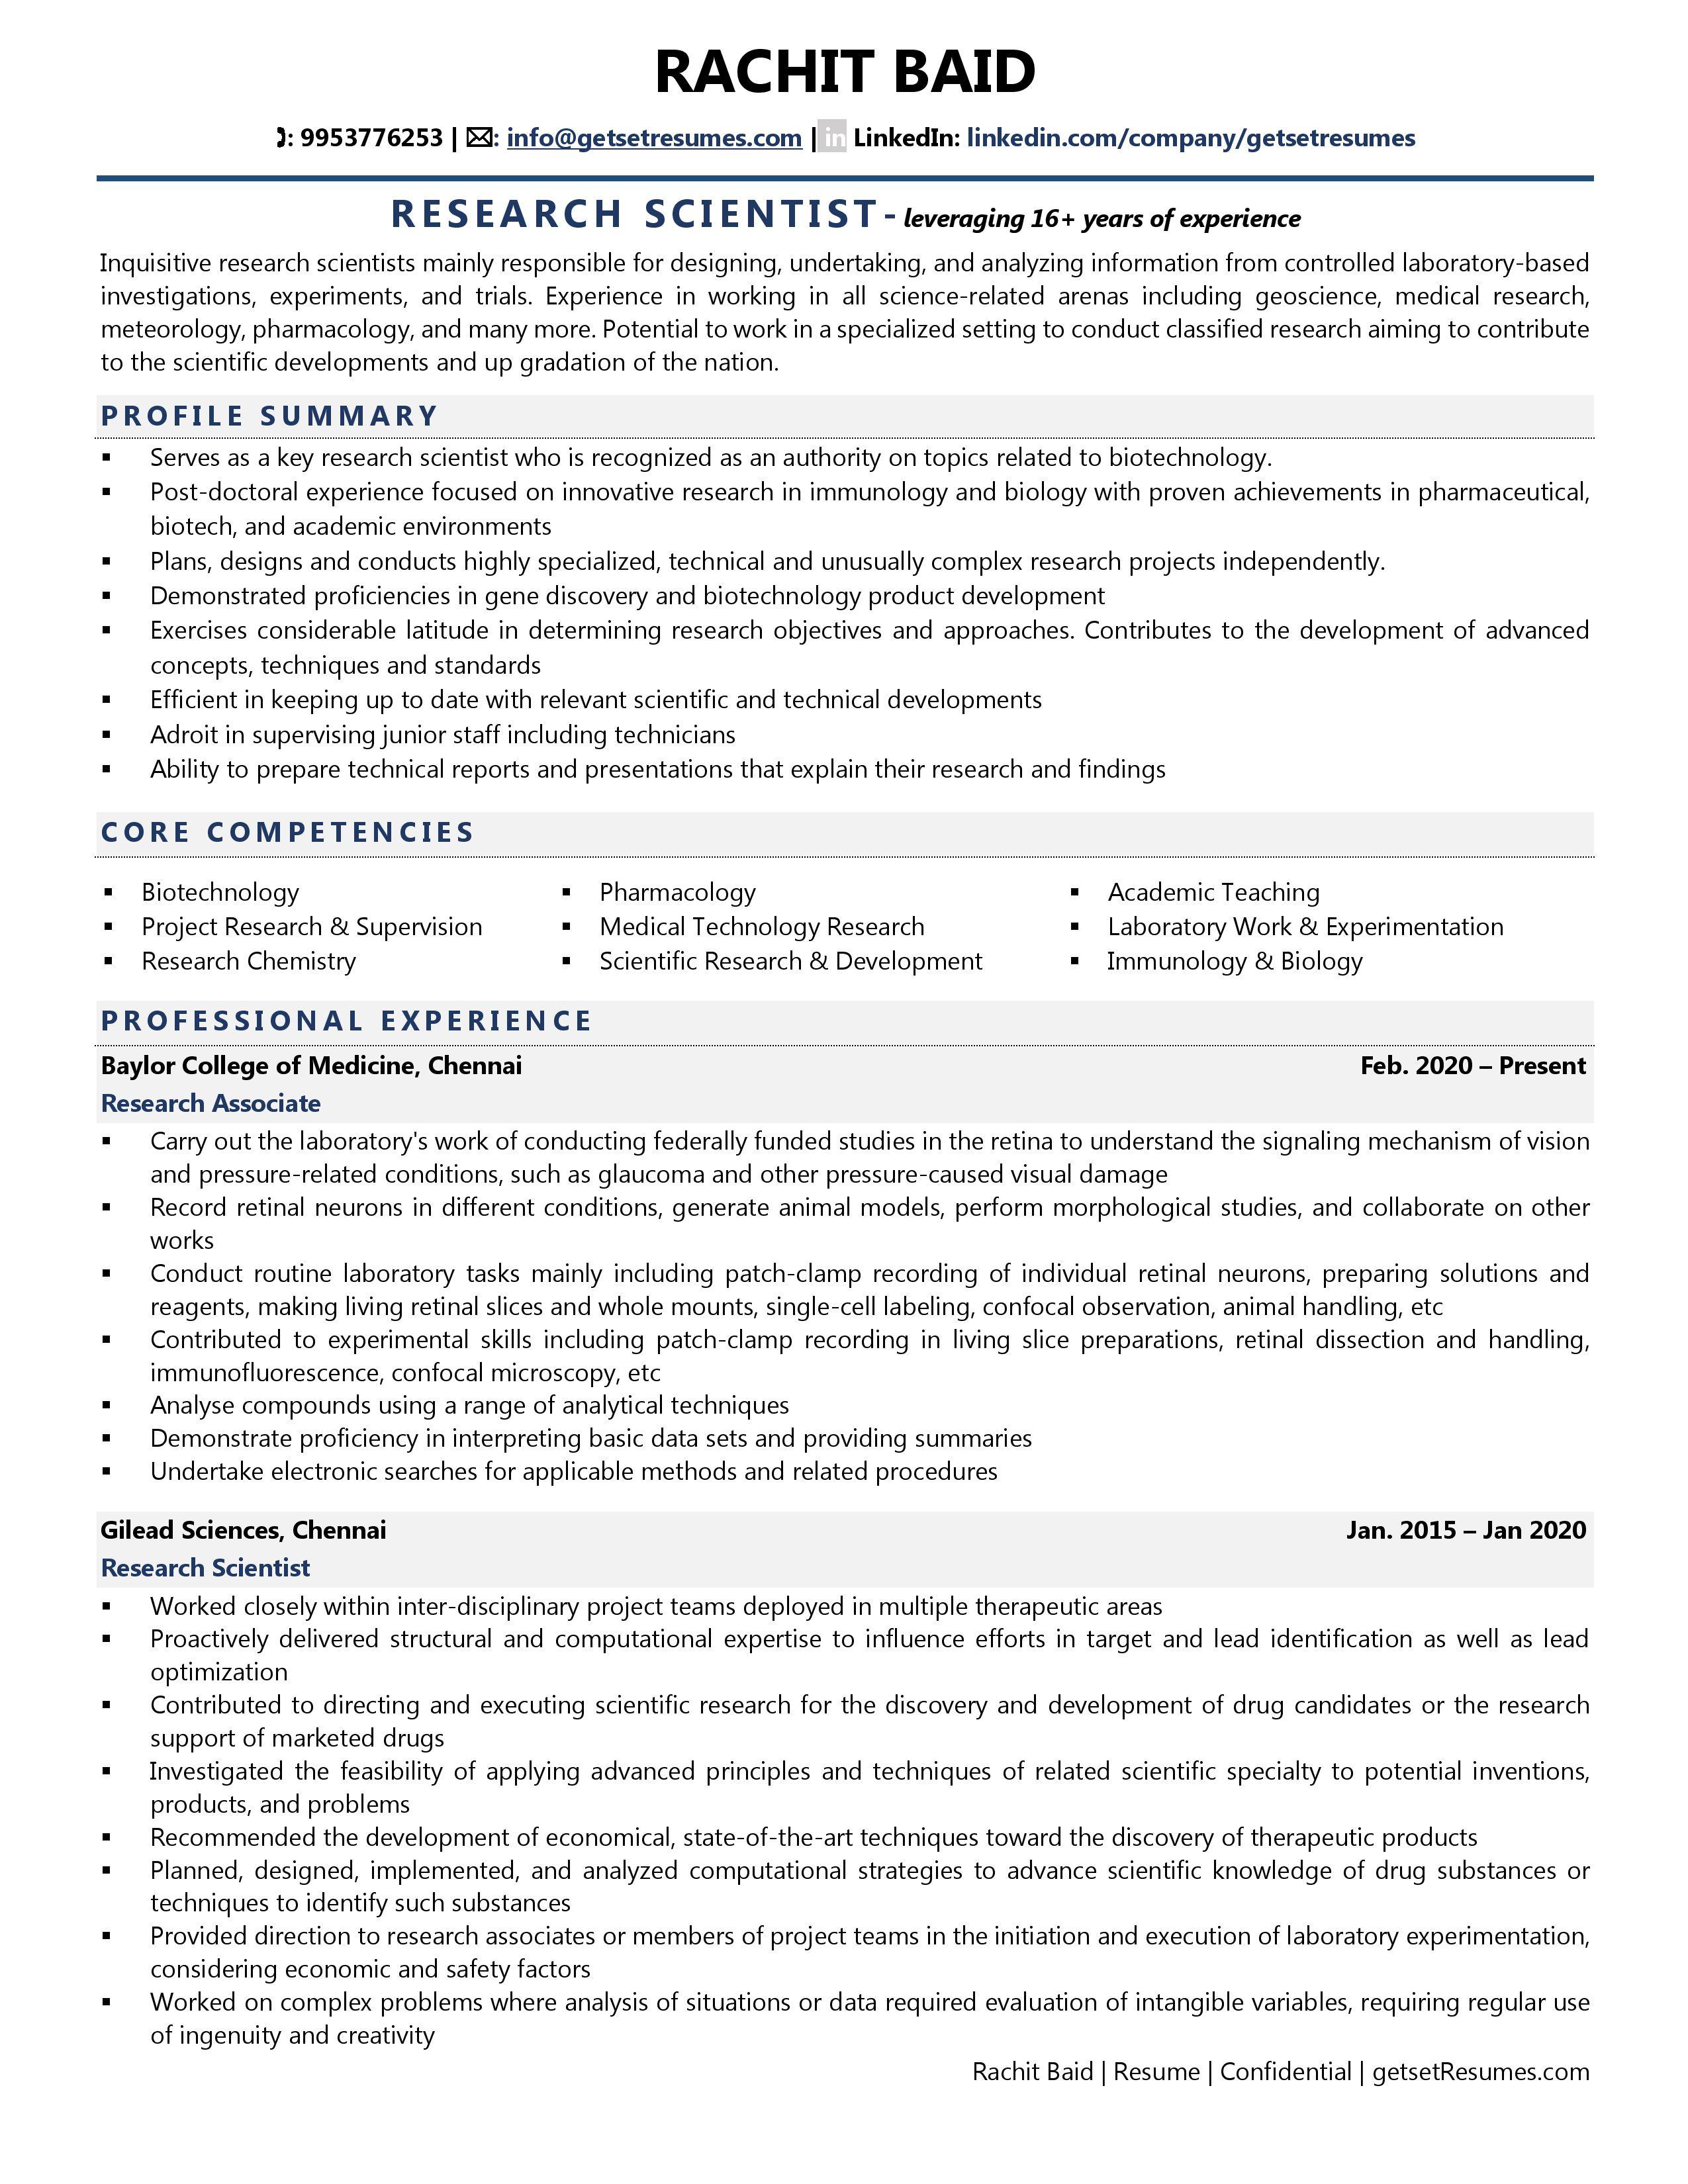 Research Scientist - Resume Example & Template